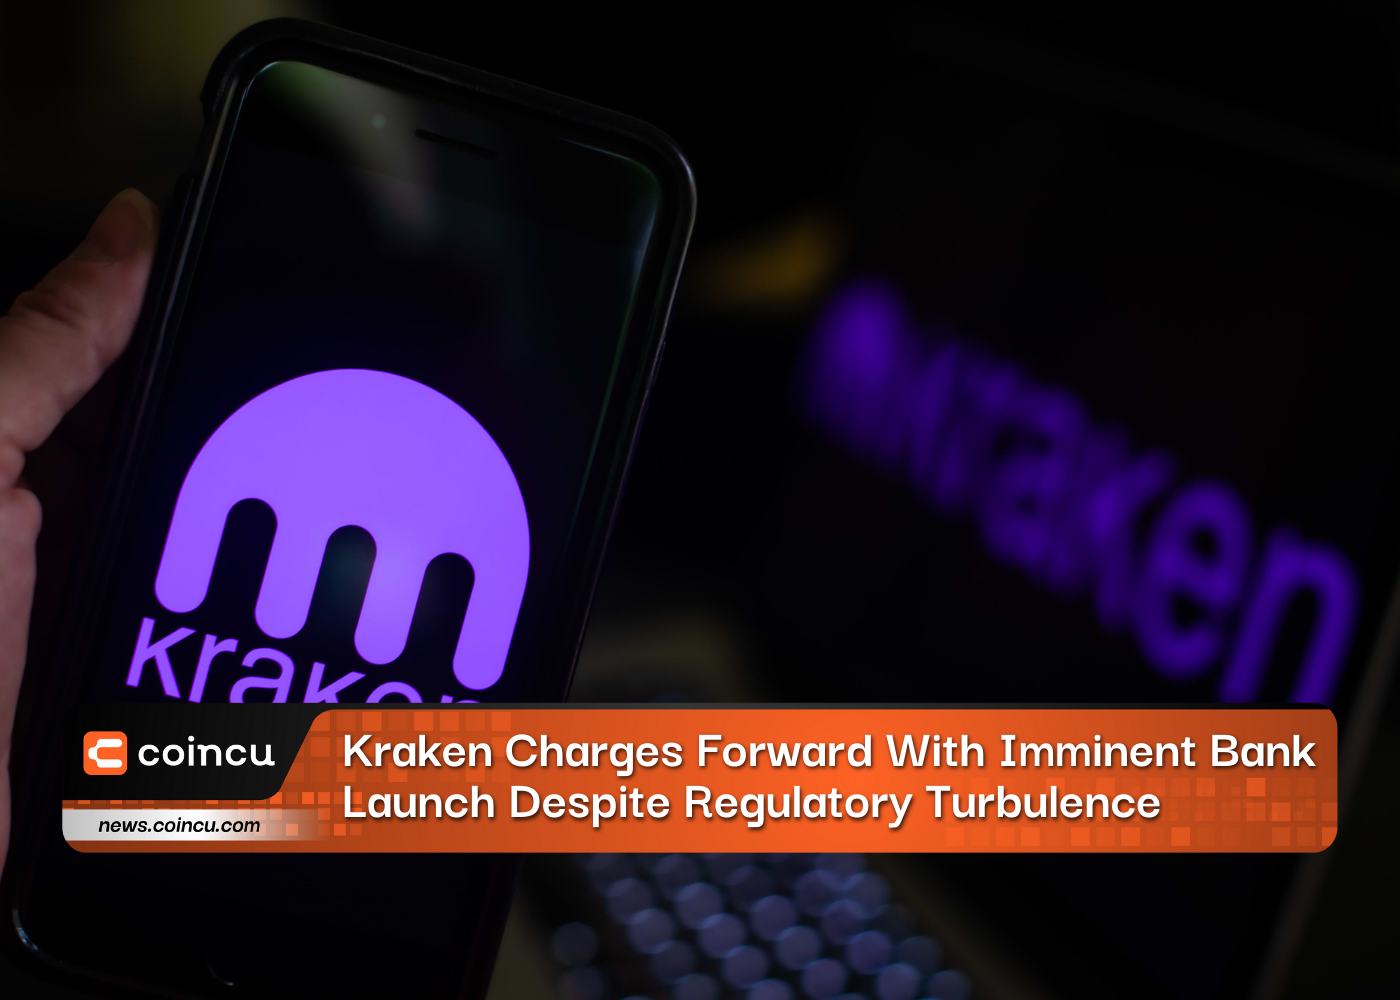 Kraken Charges Forward With Imminent Bank